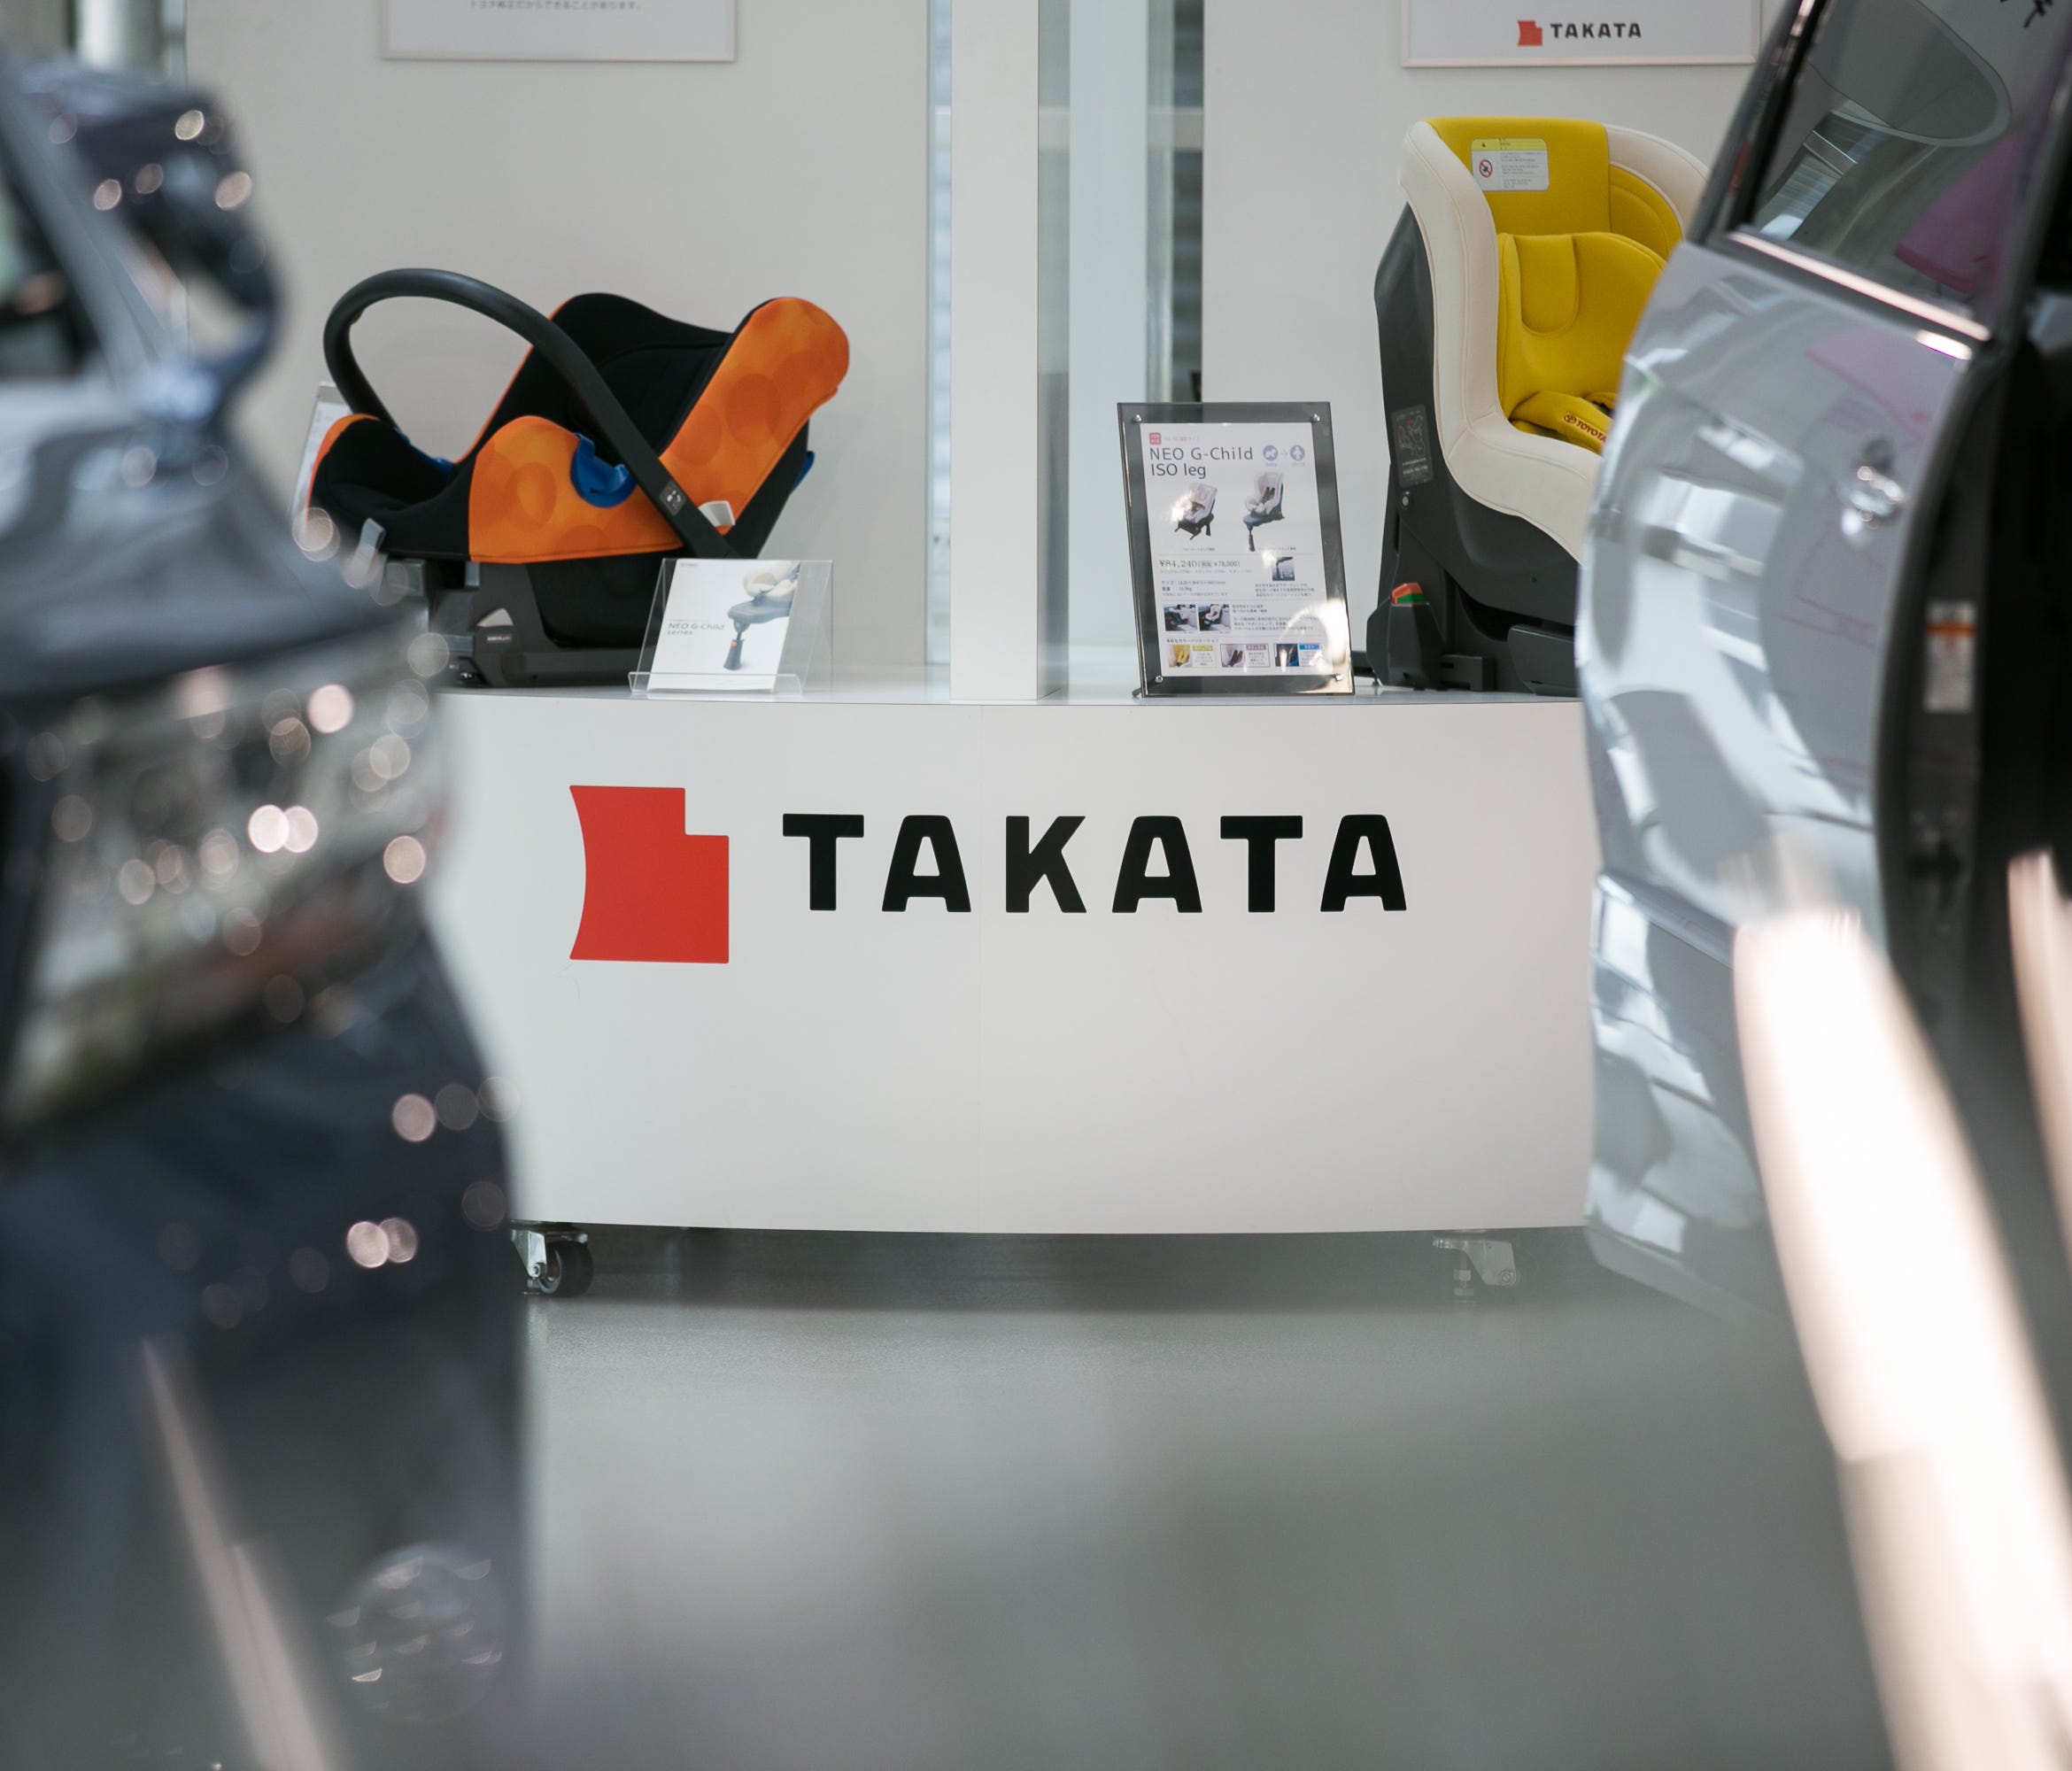 A Takata Corp. logo is seen on a display of child safety seats at a car showroom on June 26, 2017 in Tokyo, Japan. Japanese air bag maker Takata Corp. has filed for bankruptcy protection in Tokyo and the U.S. on June 26, 2017, overwhelmed by the outc